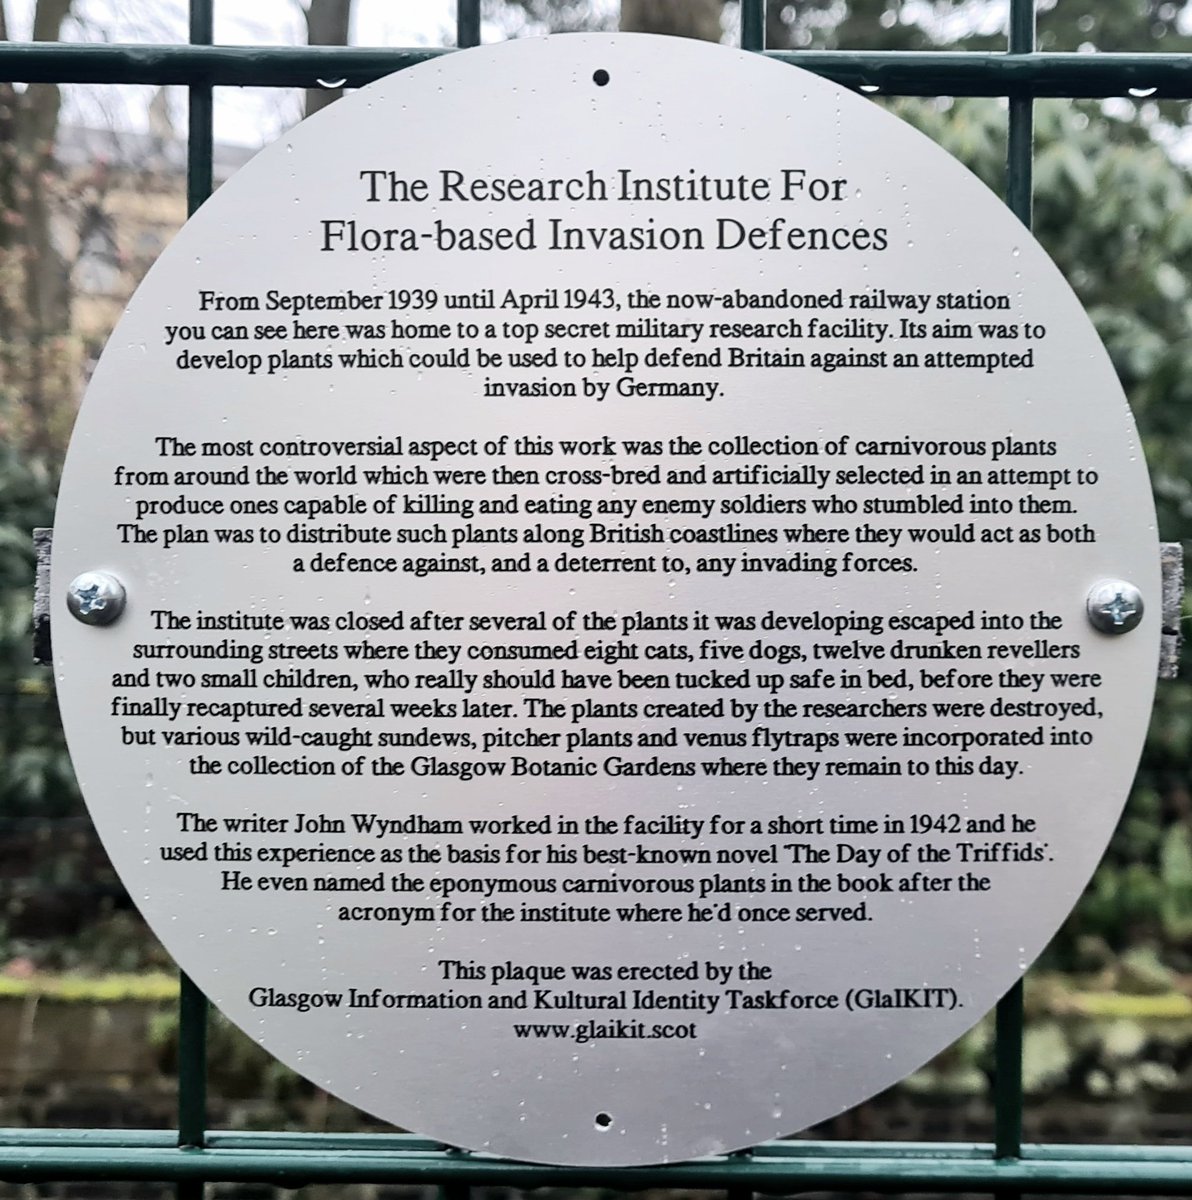 The fourth plaque is dedicated to uncovering wartime mis-adventures at a secret military research facility beneath Glasgow's Botanic Gardens, where it is sited, and the science fiction novel they inspired. 

#glasgow #triffids #glasgowbotanicgardens  #johnwyndham #AprilFoolsDay